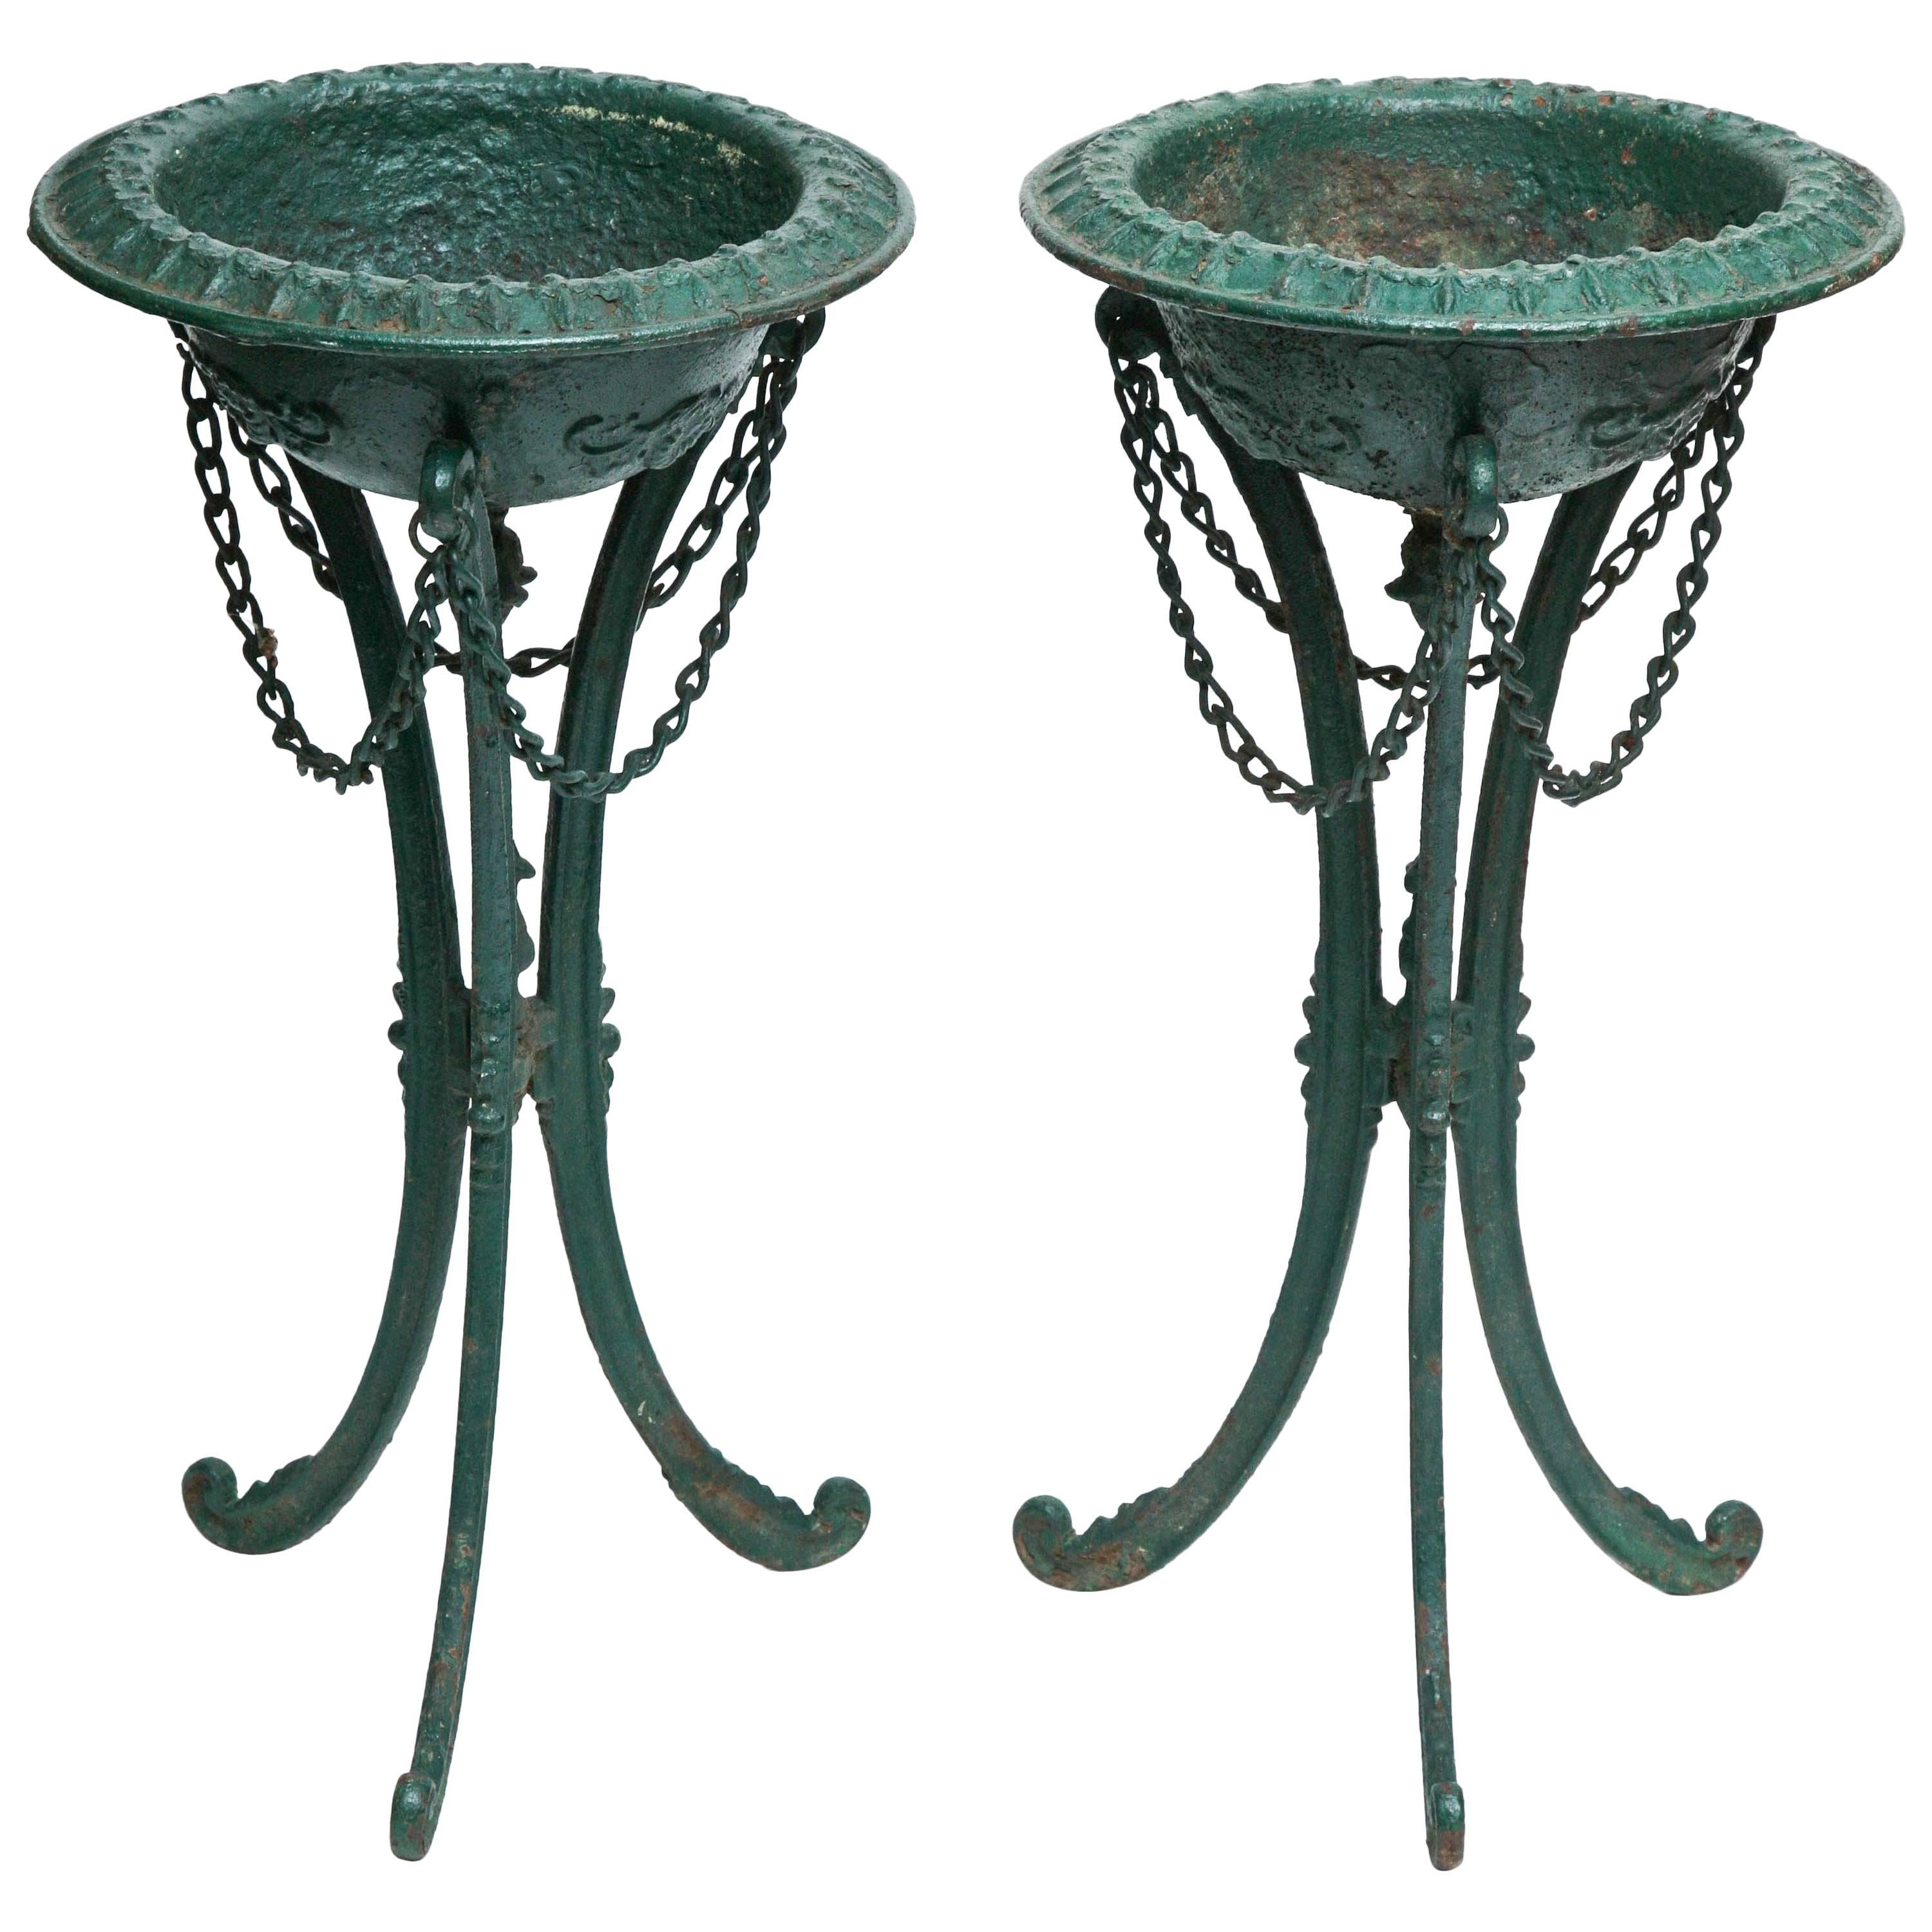 Unusual Pair of 19th Century Cast Iron Plant Stands